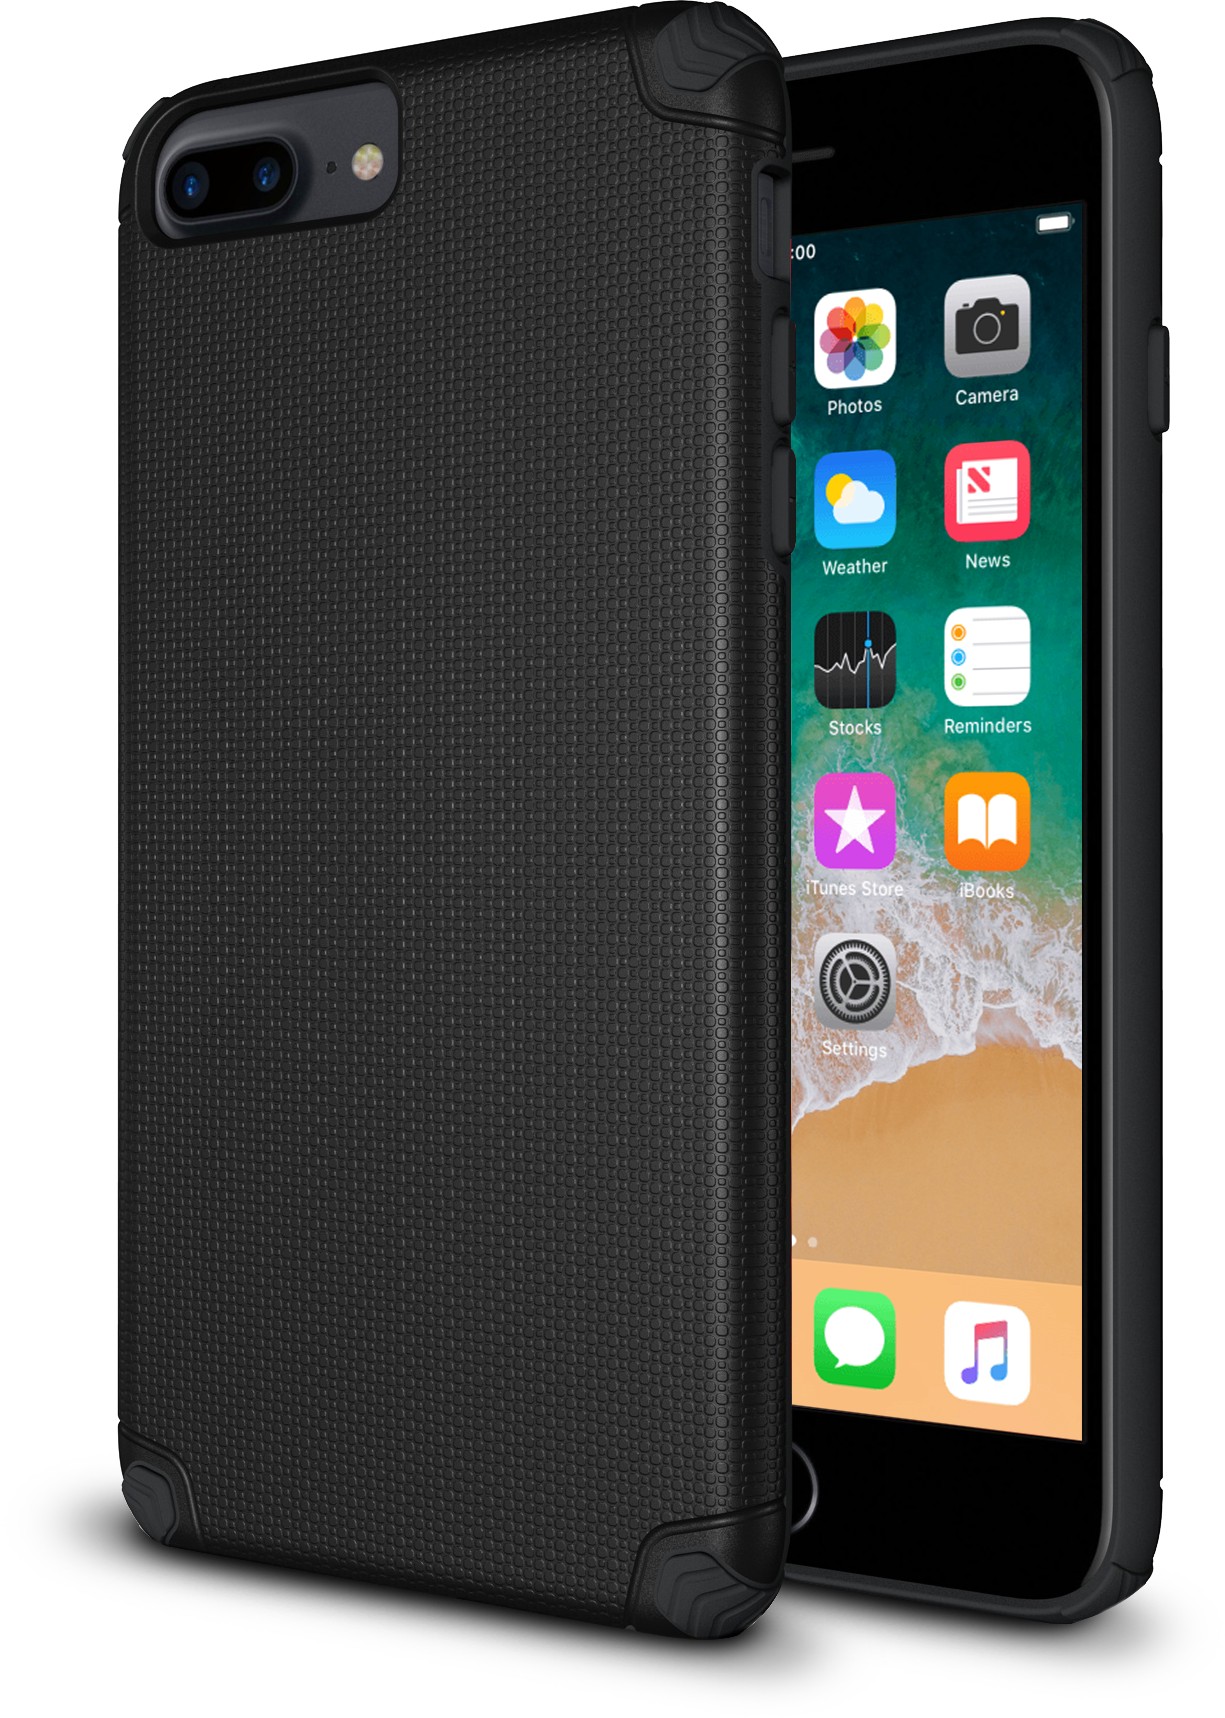 Black Rugged case protective for iPhone 6, 7, 8 Plus cell phones